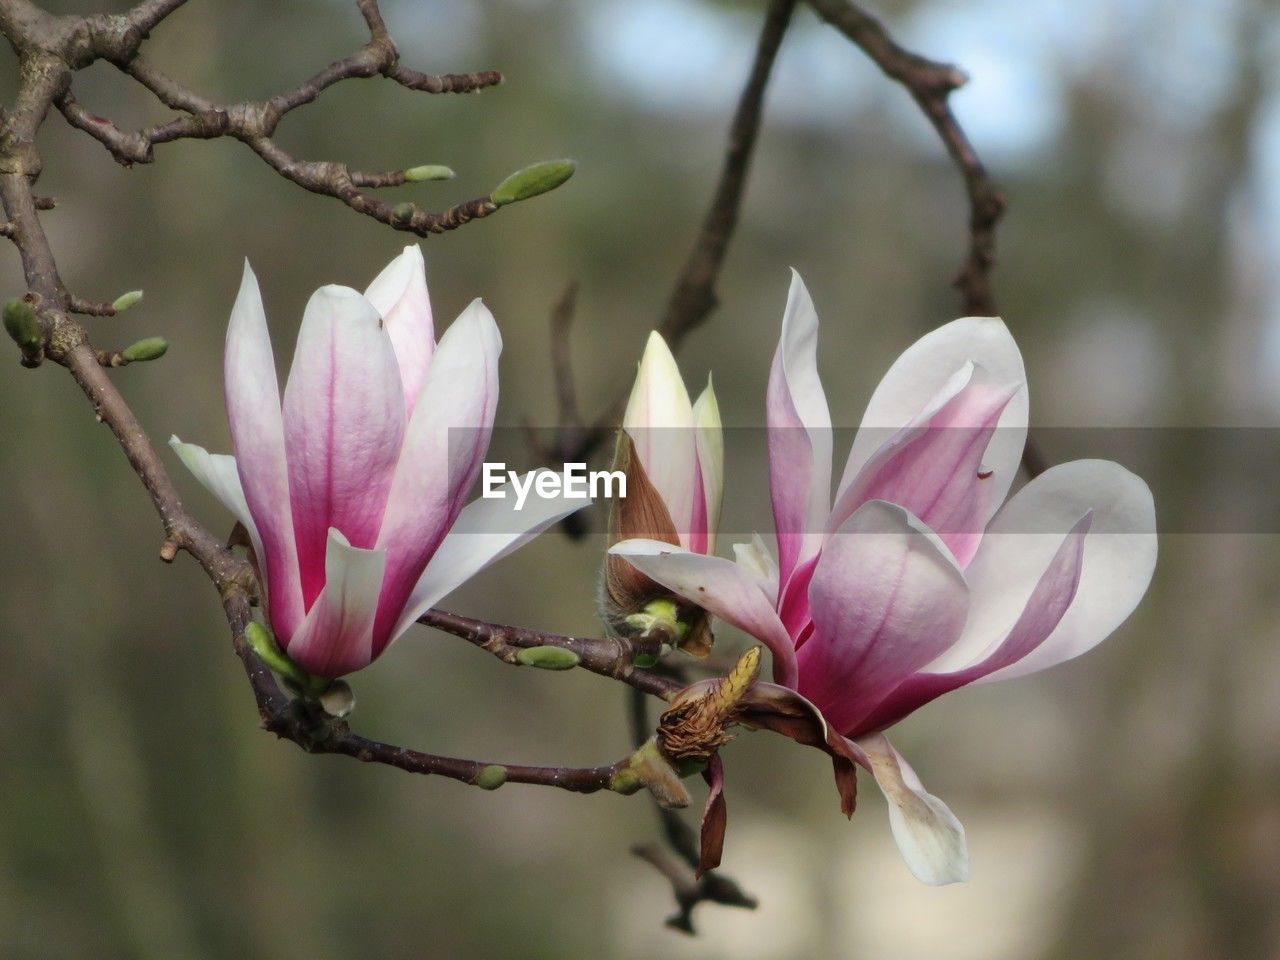 plant, flower, flowering plant, blossom, pink, beauty in nature, freshness, magnolia, nature, tree, close-up, petal, spring, springtime, fragility, branch, no people, growth, macro photography, focus on foreground, bud, flower head, inflorescence, outdoors, botany, social issues, plant part, leaf, environment, day